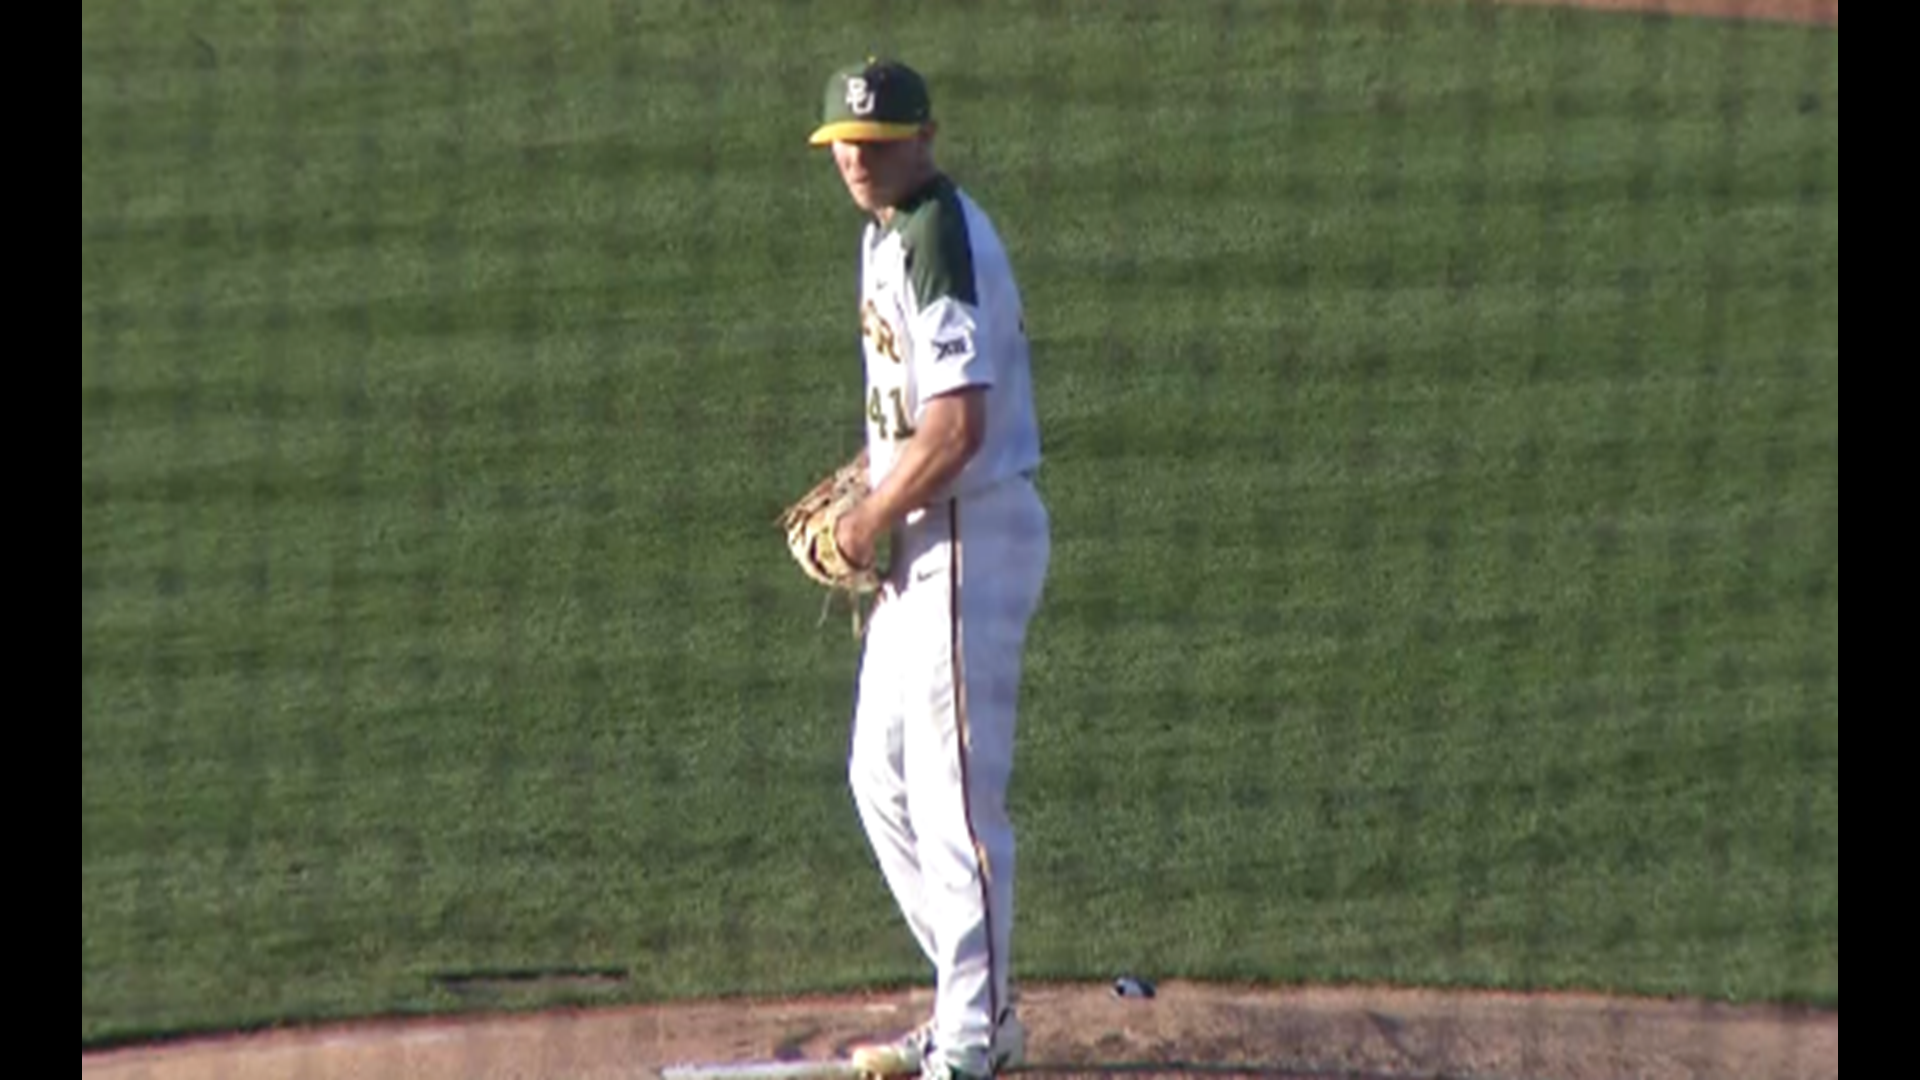 Baylor baseball improves to 12-4 with a 3-0 win over Cal Poly.